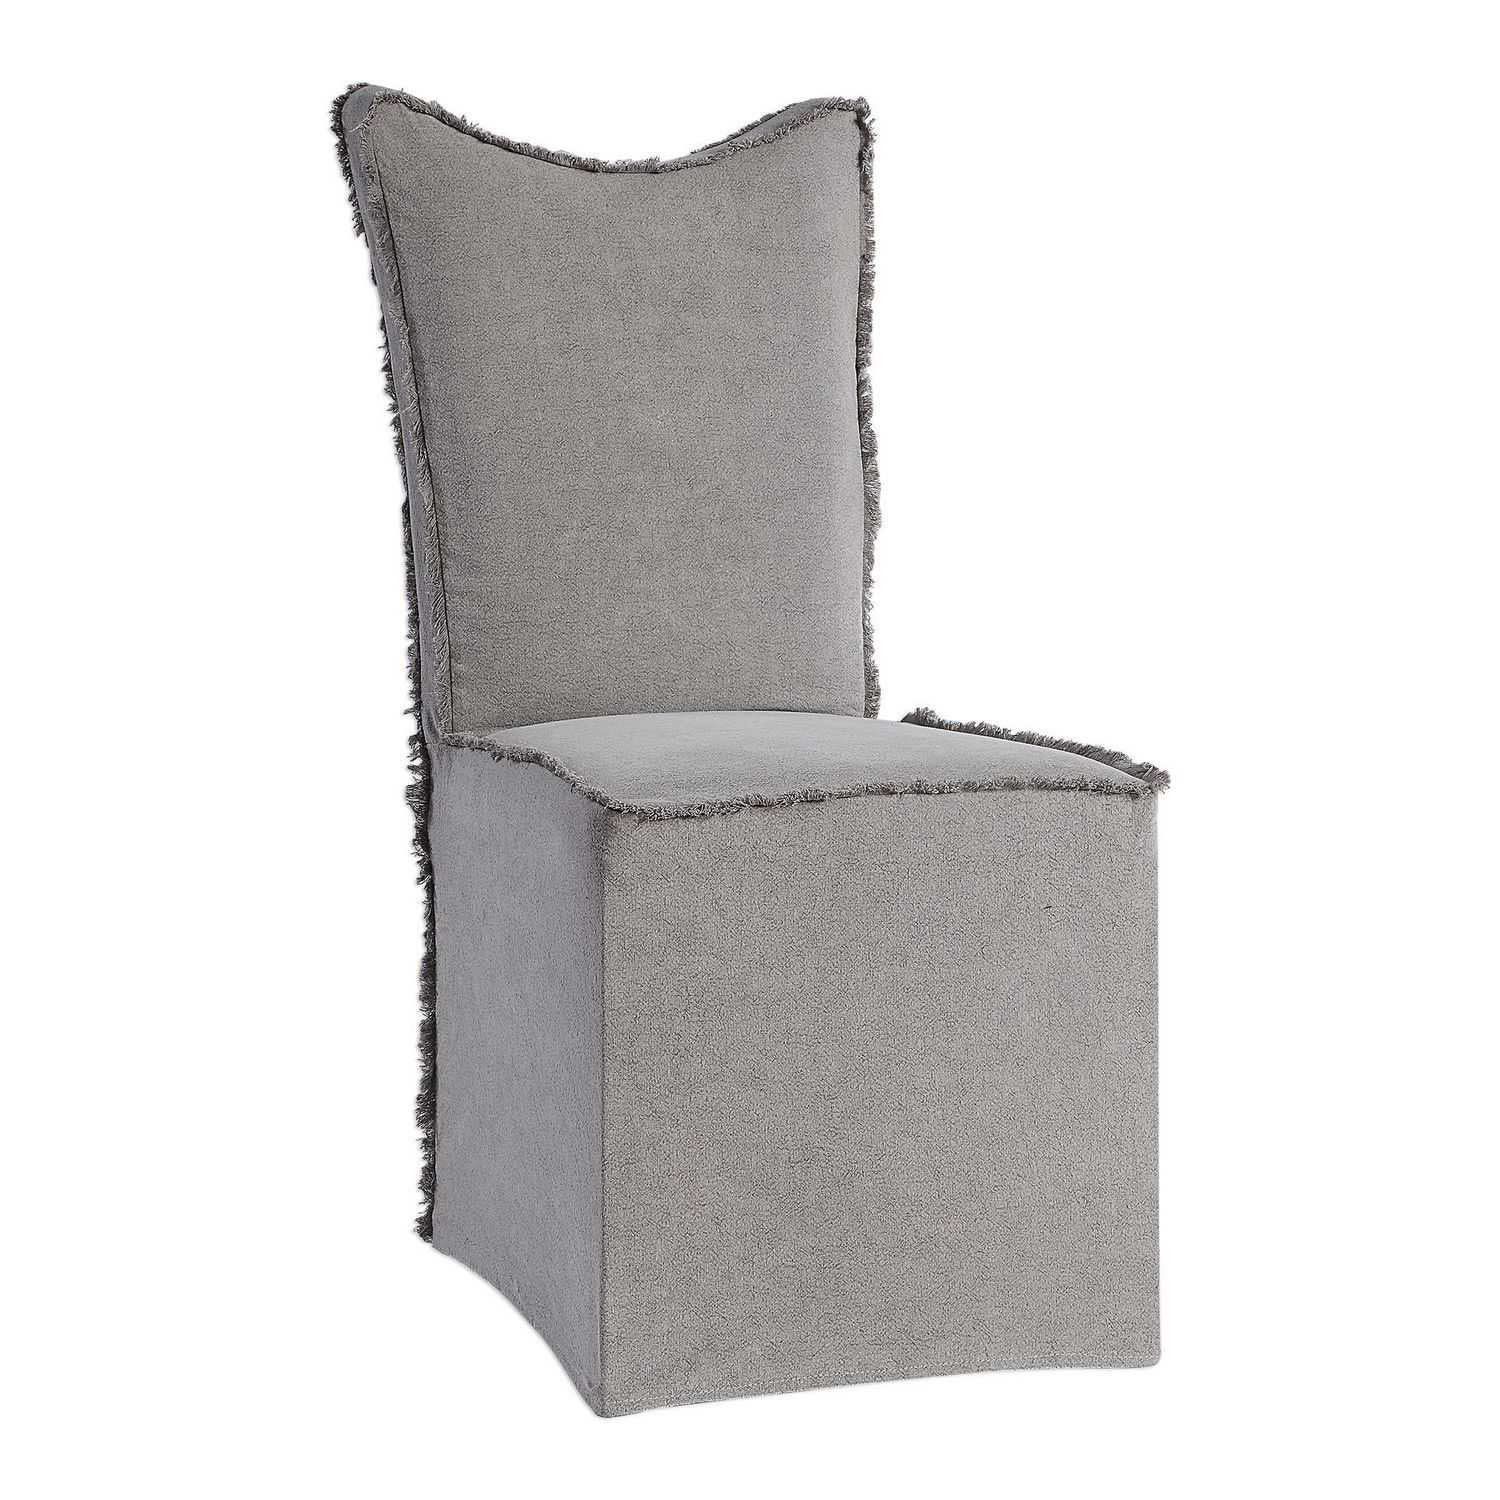 Uttermost Narissa Armless Chairs - Set of 2